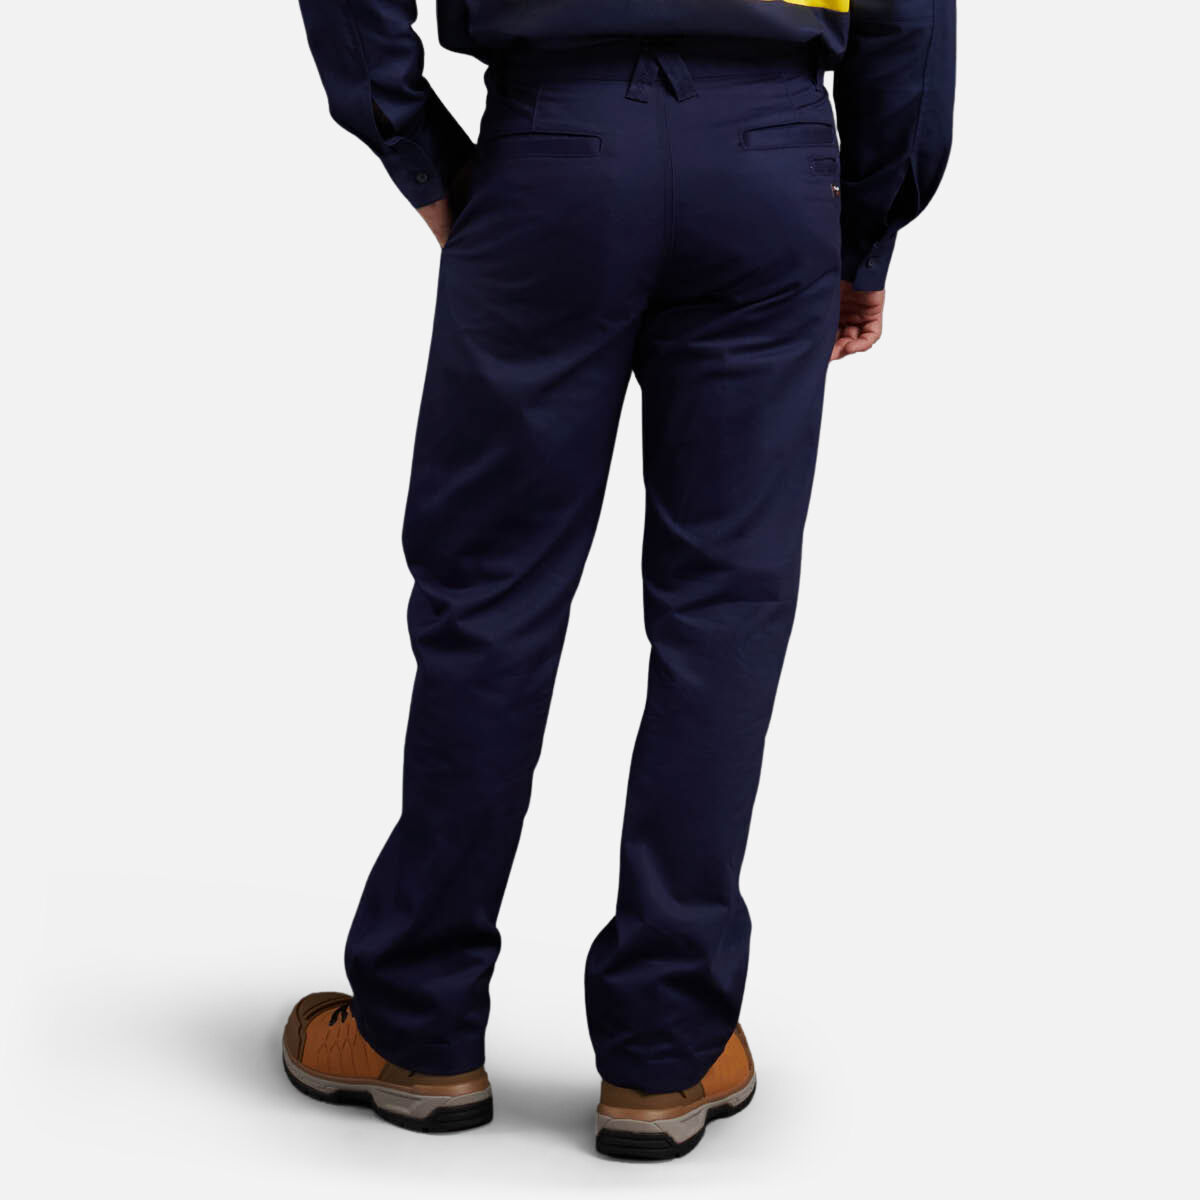 Sparky Casual Wear Mens Cotton Trousers